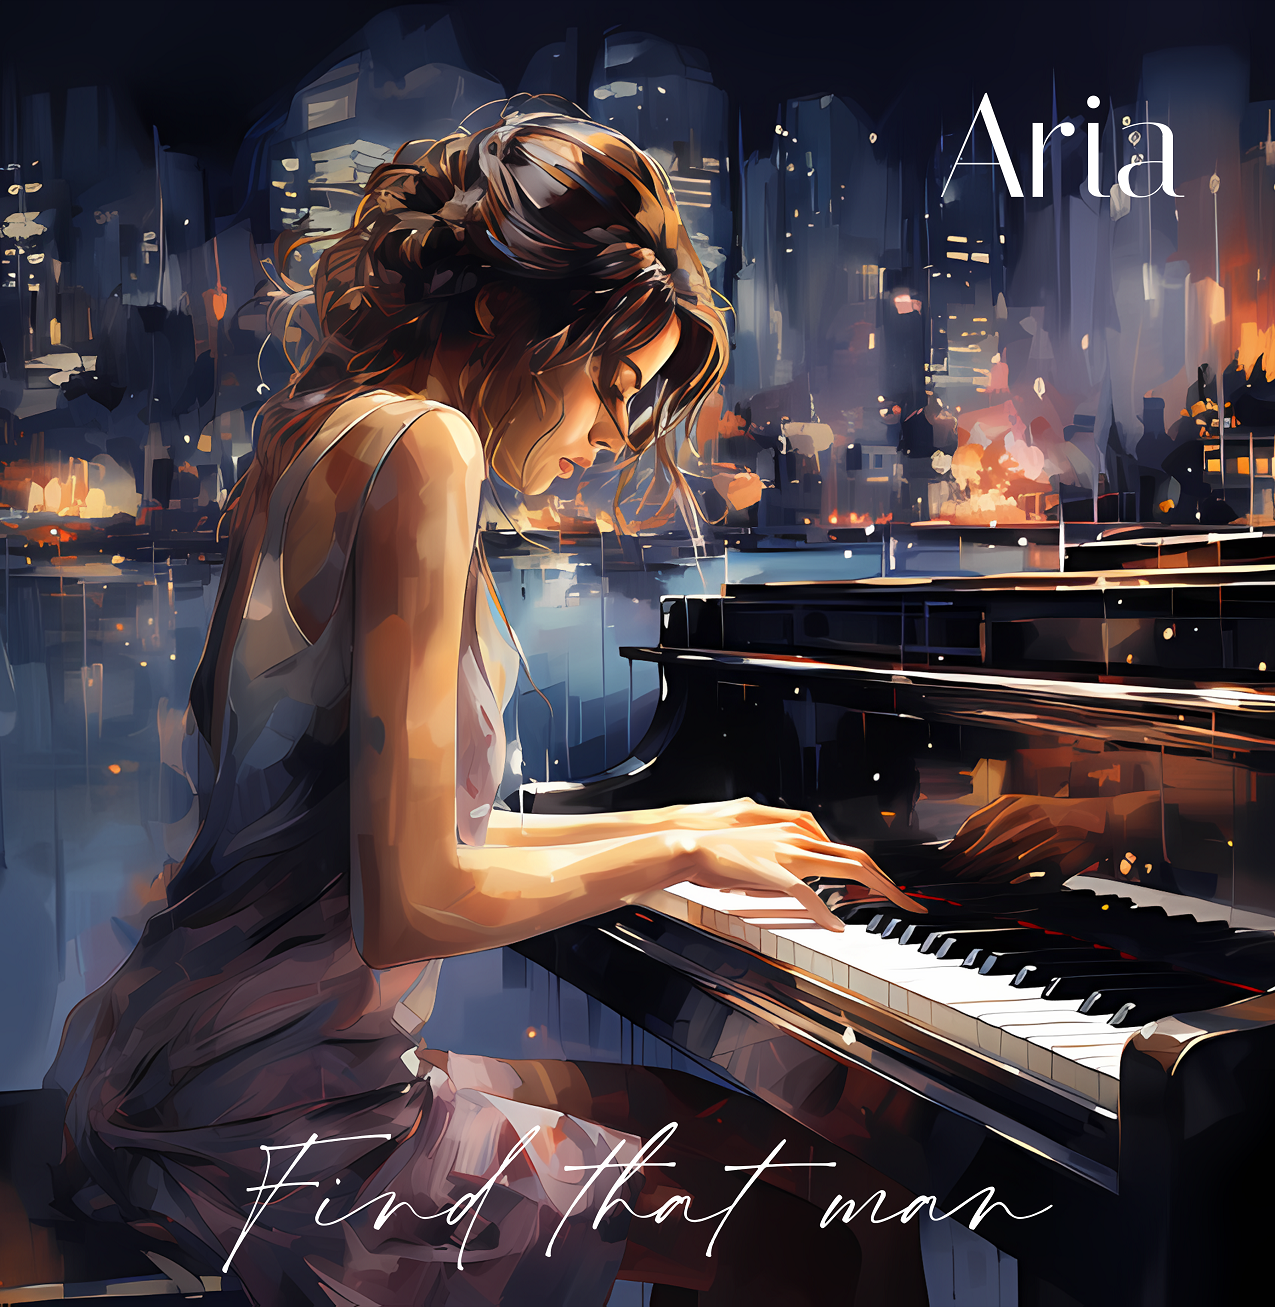 composer and producer known as Aria